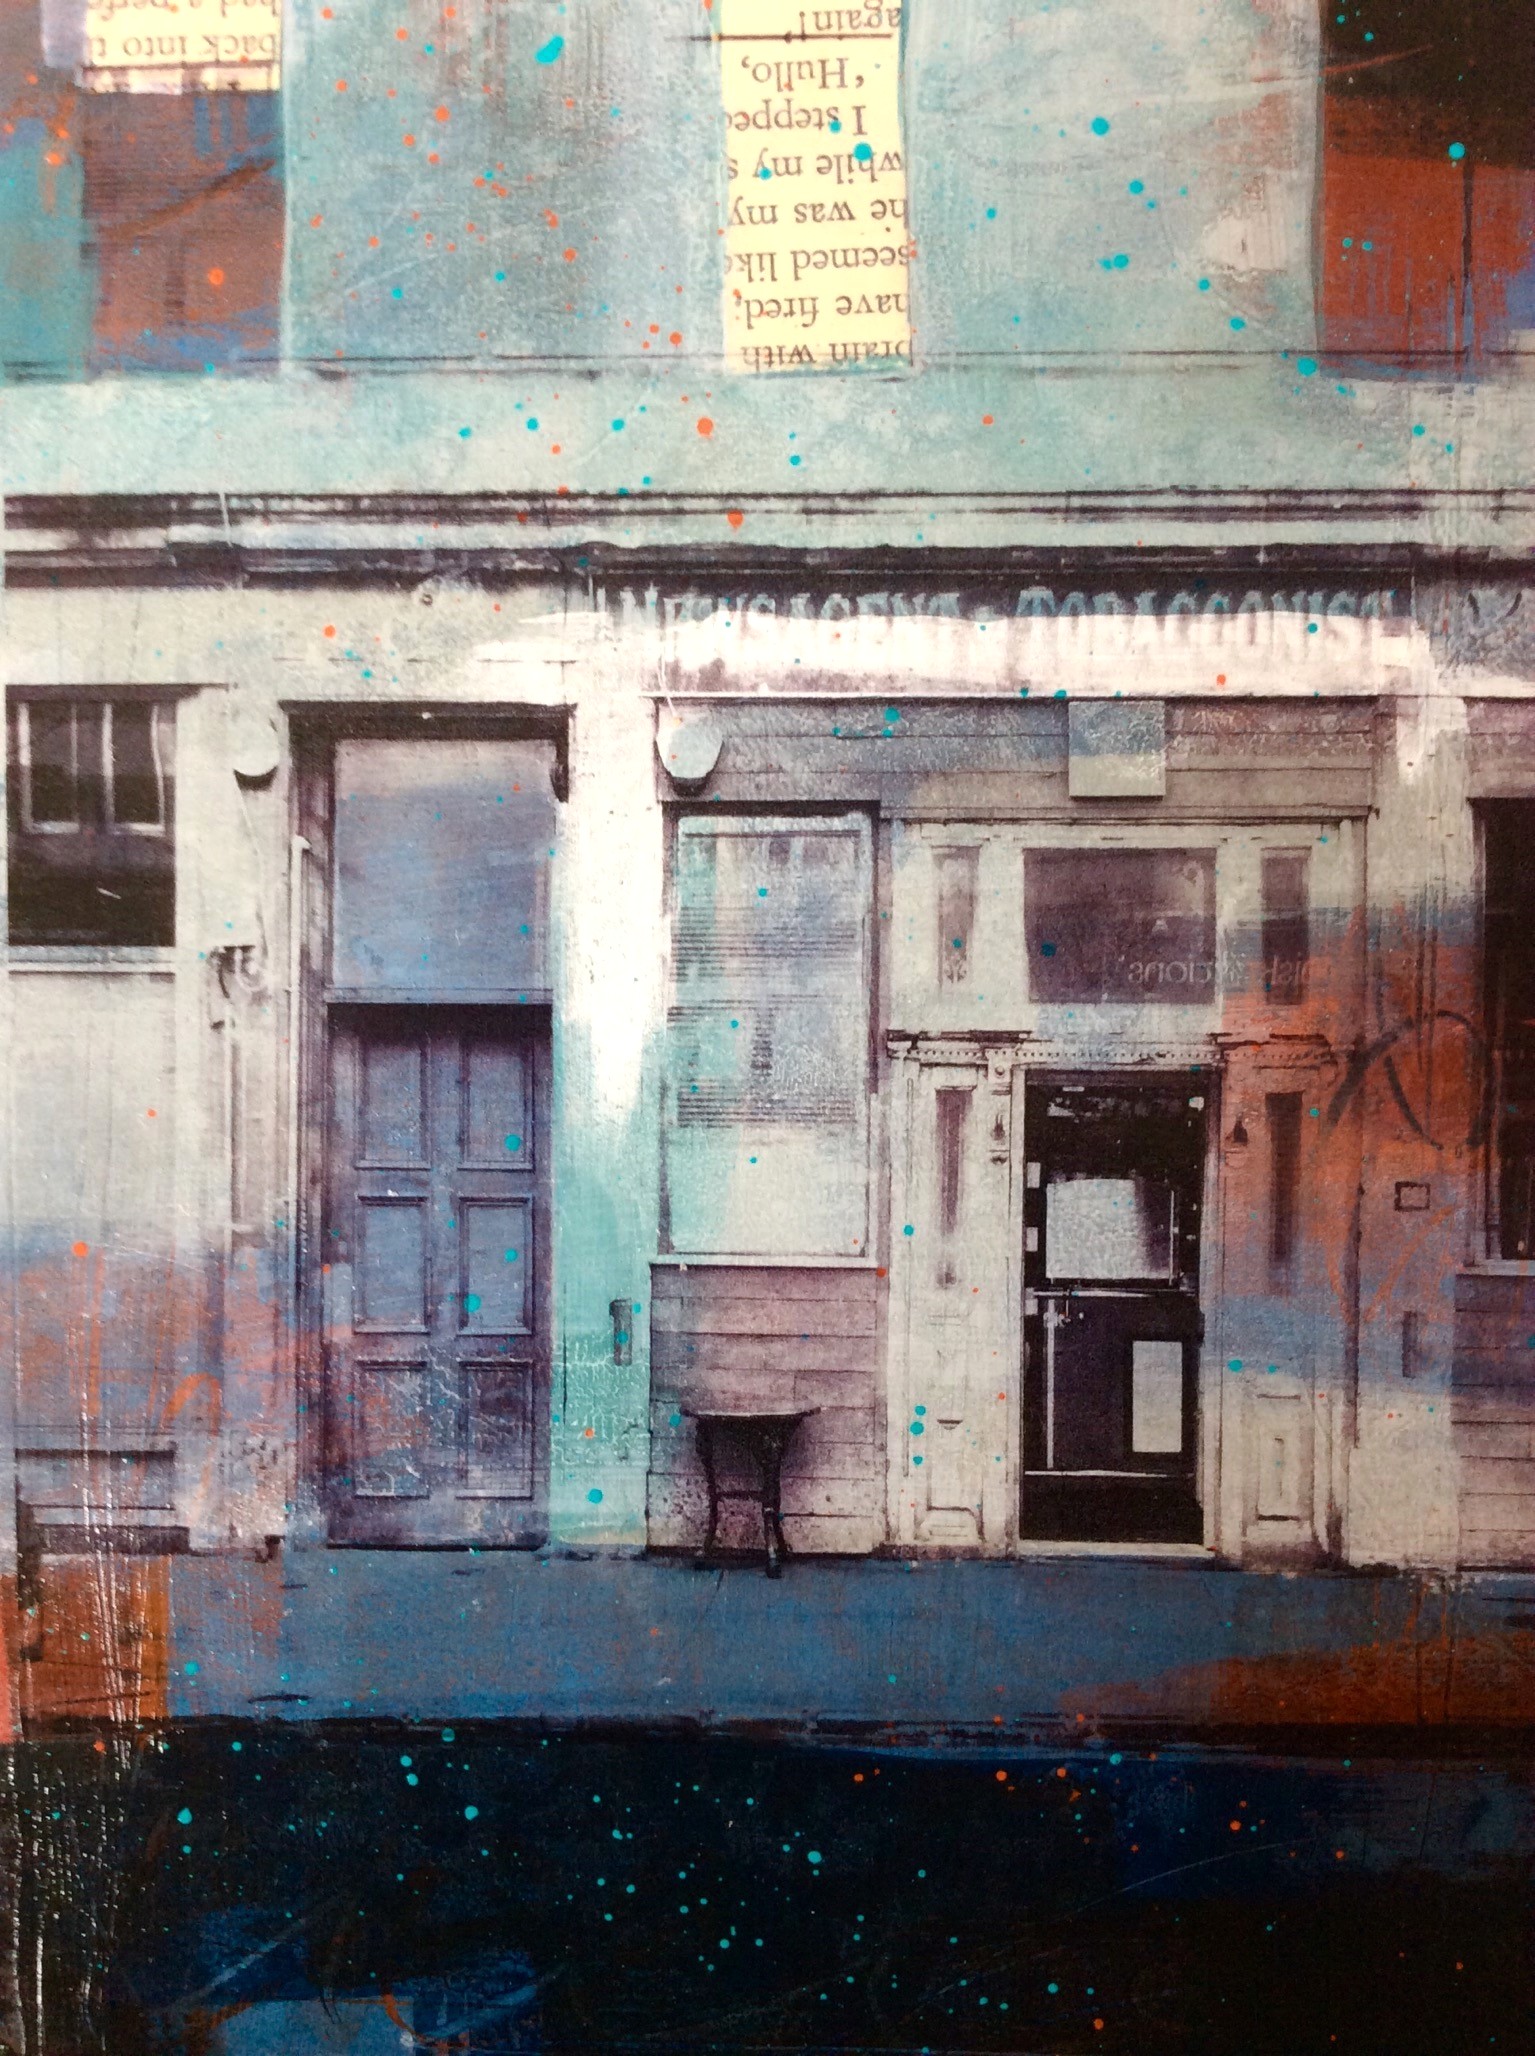 'Glasgow Streetscape #14' by artist Claire Kennedy